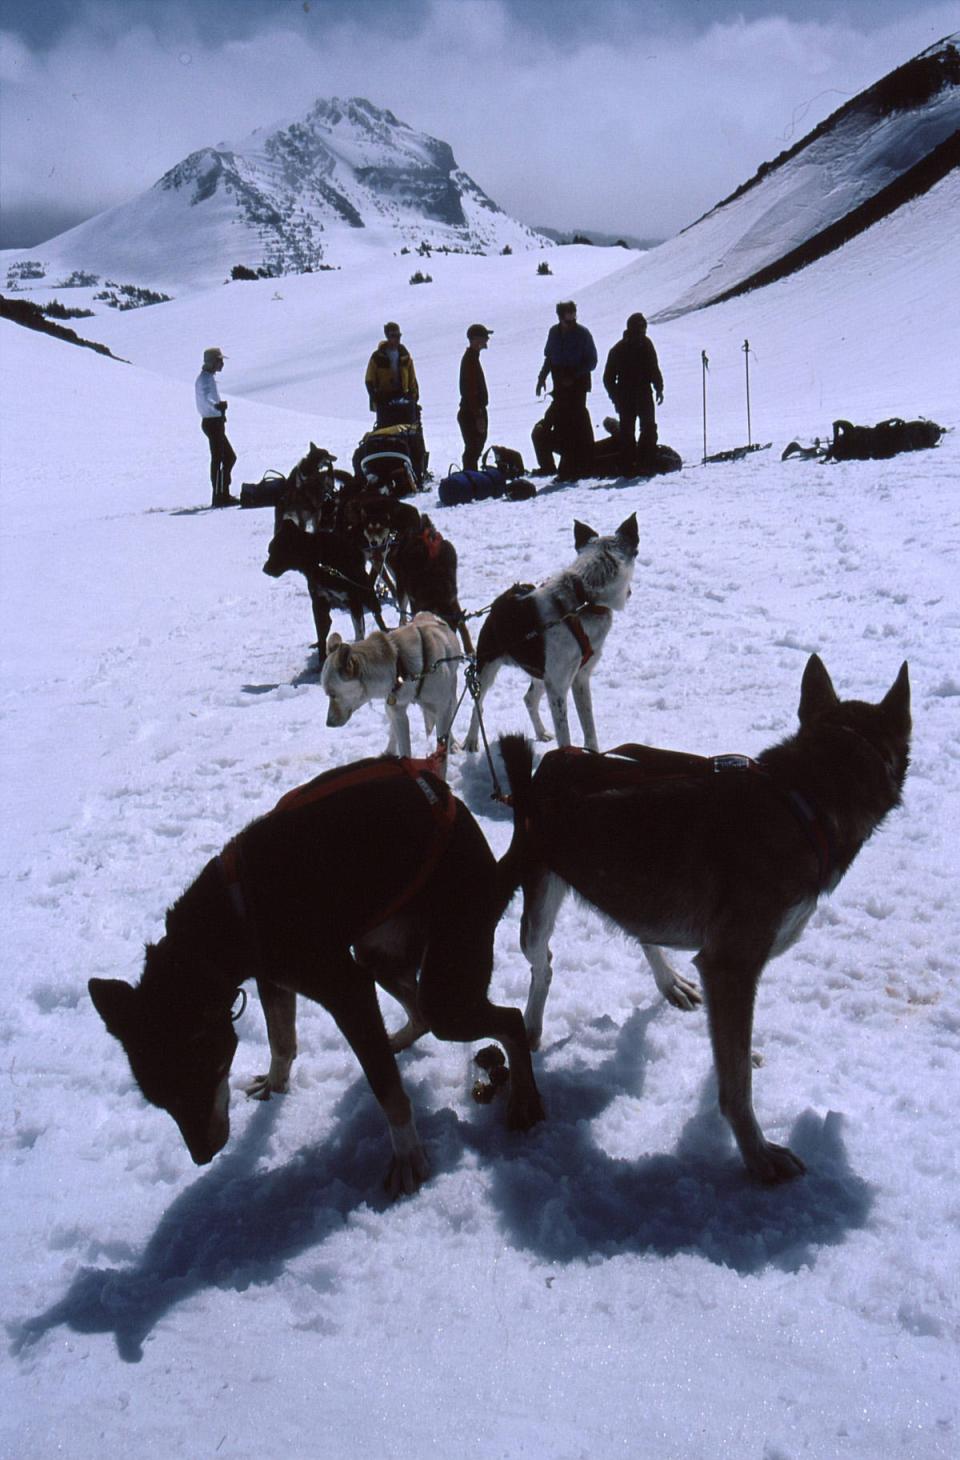 Sled dogs are seen on Broken Top during an "Oregon Field Guide" trip.